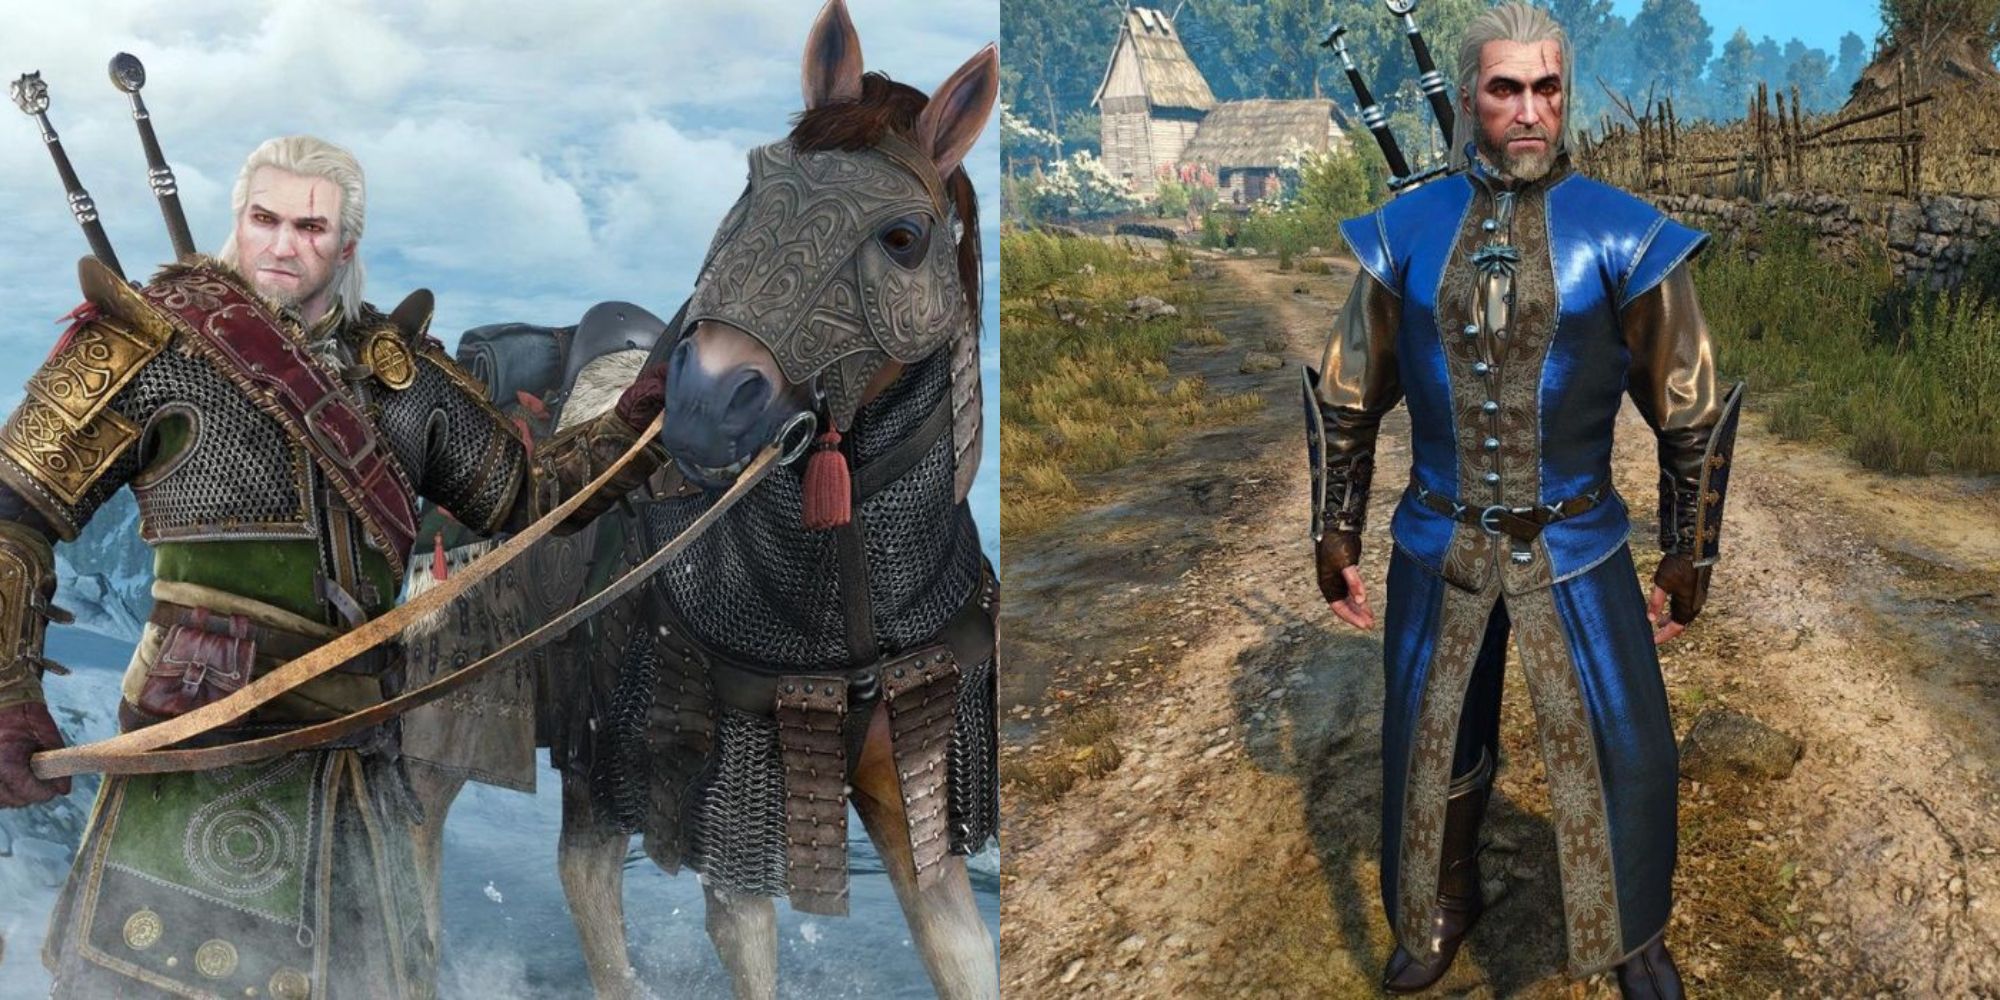 The witcher 3 witcher armor sets фото 23